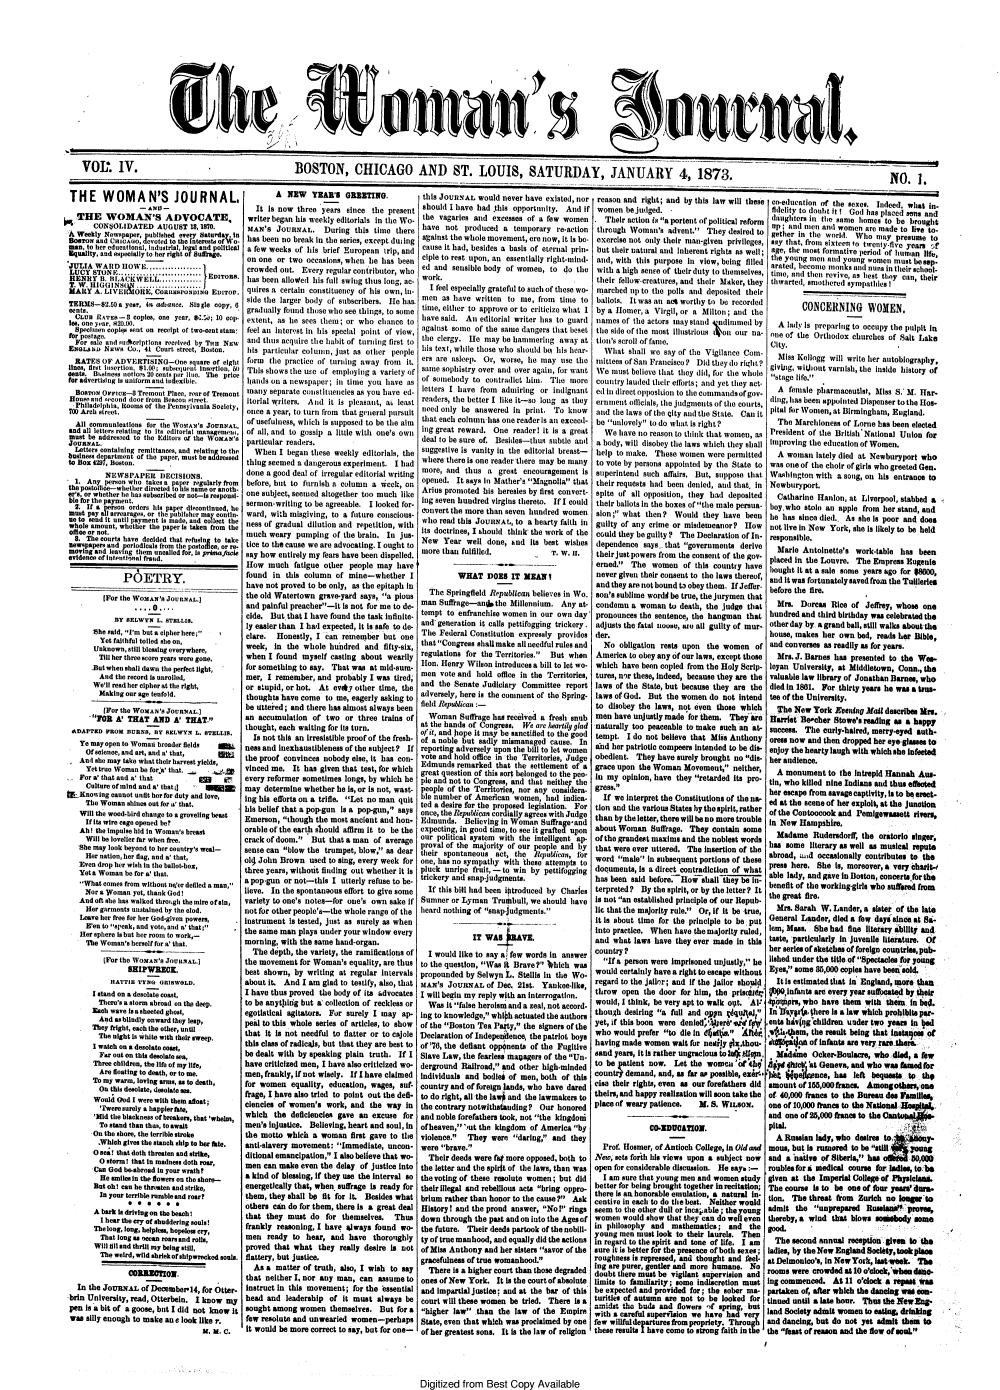 handle is hein.journals/wmjrnl4 and id is 1 raw text is: 







CIS


BOSTON, CHICAGO AND ST. LOUIS, SATURDAY, JANUARY 4, 1873.


THE WOMAN'S JOURNAL,
                   _AN-
   THE WOMAN'S ADVOCATE,
       CONSOLIDATED AUGUST 18, 1870.
 A Weekly Newspaper, publishled every Saturday in
 BosTox and CmCAo,  devoted to the faterest, ofWo-
 man, to her educational, Industrial, legal and political
 Squality, and especially to her right of Smntkage.
 JULIA WARD   HOWE.......-.....
 LUCY STON-F    --ci --i-i-------   EDITORS.
 HENRY   iB. BLtACWELL-----------a..
 T. W. HIGGINS(N  ........--.......
 MARY  A. LVEltORE, Coau'sroNeo ErrITO.
 TERMS-2.50  a year, in advance. Single copy, 6
 cents.
 CLUa   RATES-3  Copies, One year, 84'.W ; 10 cop.
 leS, one year, 820.00.
 Speolmen  coplqs sent on receipt of two-cent stam
 for postage.
 For  sale and authorptons received by TaE Nw
 ENeA     Nws   Co., 41 Court street, Boston.
 RATES   OF  ADVERTISING-One square   of eight
 lines, first isertion, $1.00; subsequent insertion, 0
 cents. Baustness noticea 20 cents per Hue. The price
 for advertising is uniform and inexible.
 BOSTON  OFFICE-8  Tremnt Place, rear of Treaont
 House and wceond door from Becon street.
 Philadelphia, Itooms of the Pennsylvania Society,
 700 Arch street.
 All  communications for thie WorAx's JOURNAL.,
 and all letters relating to Its editorial managenmem,
 must be addressed to the Editors of the WOMAN'S
 JOURNAL.
 Letters containing remittances, and relating to the
 businessi department of the paper, must be addressed
 to Box 429, Boston.
          NEWSPAPER DECISIONS.
  1. Any  person who takes a paper regularly from
thepOetotIlee-whether directed to lis name or anoth-
er's, or whether he las subscribed or not-is responsi-
ble for the payment.
  2. If a nerson orders his paper discontinued, he
  must pay all arrearages, or the publisher mar contin-
  ue to send it until payment is made, and collect the
  whole amount, whether the paper is taken from the
  office or not.
  8. The courts have decided that reflsing to take
  newspapers and periodicals from the postoice, or re-
  moving and leaving them uncalled for, Is primaflce
evidence of Intentional frand.

               P6ETRY.

          [For the WOxAN'S JoUNAL.)
                  ....O....
            BY SELWYN   L. STELLIS.
       She said, I'm but a cipher here;
         Yet faithful toiled she on,
       Unknown, still blessing everywhere,
       Till her three score years were gone.
       nBut when shall dawn the perfect light,
         And the record Is unrolled,
       We'll read her cipher at the right,
       Making  our age tenfold.
          (For the WOMAN'S JoURNAL.]
      FOR   A' THAT   AND  A' THAT.
 ADAPTED  PROM  BURNS, BY SELWYN  L. STELLIS.
   Ye may open to Womami broader fields HIL
   Of  science, and art, and a' that,
   And  he may take what their harvest yields,
     Yet true Woman be for'a' that.   .d
  .For a' that and a' that         5g    87
     Culture of mind and a' that;]  iggg
bLKnowing   cannot unfit her for duty and love,
     The Woman  shines out for a' that.
   Will the wood-bird change to a groveling beast
     If its wire cage opened be?
   AhI  the impulse hid in Woman's breast
     Will be lovelier thr when free.
   She may look beyond to her country's weal-
     Her nation, her flag, and a' that,
   Even drop her wish in the ballot-box,
   Yeta Woman  be for a' that.
   What  comes from without ne'er defiled a man,
     Nor a Woman yet, thank God!
   And oft she has walked thromgh the mire ofain,
     Her garments unstained by the clod.
   Leave her free for her God-given powers,
     E'en to speak, and Vote, and a' that;
  Her  sphere is but her room to work,-
    The  Woman's herself for a' that.

          [For the WOMAN'S JOUsAL.]
                SHIPWRECE.
           HATTIE TYNG  GRIWOLD.
       I stand on a desolate coast,
       There's a storm abroad on the deep.
       Each wave isa sheeted ghost,
       And   as blindly onward they leap,
       They fright, each the other, until
       The  night is white with their sweep.
       I watch on a desolate coost,
         Far out on this desolate sea,
       Three children, the life of my life,
       Are  floating to death, or to me.
       To my warm, loving arms, as to death,
       On  this desolate, desolate sea.
       Would God I were with them afloat;
         'Twere surely a happier ate,
       'Mid the blackness of breakers, that 'whelm,
       To  stand than thus, to await
       On the shore, the terrible stroke
       ,Whch   gives the stanch ship to her tte.
       0 se! that doth threaten and strike,
       O  storm! that in madness doth roar,
       'Can God be-abroad in your wrath?
         He smilesin the flowers on the shore-
       But oht can he thraten and strike,
         In your terrible rumble and roar?
               *  * *0   **
       A bark Is driving on the beach!
         I hear the cry of shuddering souls!
       The long, long, helpless, hopeless cry,
         That long as ocean roars and rolls,
       Will fill and thrill my being still,
         The weird, wild shrekof shipwrecked souls.

                COE0OO.
   In the JouNaxL  of Deceaber14,  for Otter-
 brin University, read, Otterbein. I knoW my
 pen is a bit of a goose, but I did not know it
 was silly enough to make an a look like r.
                                    X. X. C.


I


        A  NEW YEA'S OEETING.
   It Is now  three years  since  the present
 writer began his weekly editorials in the Wo-
 MAN's   JOURNAL.    During  this time  there
 has been no break in the series, except duting
 a few weeks of his  brief European  trip, and
 on one  or two occasions, when be  has been
 crowded out.  Every  regular conributor, who
 has been alloWed his full swing thus long, ac-
 quires a certain constituency of his own, in-
 side the larger body of subscribers. le  hits.
 gradually found those who see things, to some
 exteat, as he sees them;  or who  chance  to
 feel ana interst in his special point of view,
 and thus acquire the habit of turning first to
 his particular column, just as other  people
 form  the practice of turning away  from  it.
 This shows the ue  of employing  a variety of
 hands on a newspaper;  in time  you have  as
 many  separate constituencies as you have ed-
 itoral writers. And  it is pleasant, a least
 once a year, to turn from that general pursuit
 of usefulness, which is supposed to be the aim
 of all, and to gossip a little with one's own
 particular readers.
   When  I began  these weekly editorials, the
 thing seemed a dangerous experiment.   I had
 done a good deal of irregular editorial writing
 before, but to furnish a column  a wck,  on
 one subject, seemed altogether too much like
 sernaon-writing to be agreeable. I looked for-
 ward, with misgiving, to a future conscious-
 ness of gradual dilution and repetition, with
 much  weary  pumping  of the brain. In  jus-
 tice to the cause we are advocating. I ought to
 say how entirely my fears have been dispelled.
 How  much   fatigue other  people may  have
 found  in this column  of mine-whether I
 have not proved to be only, as the epitaph in
 the old Watertown  grave-yard says, a pious
 and painful preacher-it is not for me to de-
 cide. But.that I have found the task infinite-
 ly easier than I had expected, it is safe to de-
 clare.  Honestly, I can  remember   but one
 week,  in the  whole hundred   and  fifty-six,
 when I found  myself  casting about  wearily
 for something to say. That was  at mid-sum-
 mer, I remember,  and  probably I was tired,
 or stupid, or hot. At evjyother   time, the
 thoughts have come  to me, eagerly asking to
 be uttered; and there has almost always been
 an accumulation  of two   or three trains of
 thought, each waiting for its turn.
 Is  not this an Irresistible proof of the fresh-
 ness and inexhaustibleness of the subject? If
 the proof convinces nobody else, It has con-
 vinced me.  It has given that test, for which
 every reformer sometimes longs, by which he
 may determine  whether he Is, or is not, wast-
 ing his efforts on a trifle. Let no man quit
 his belief that a pop-gun is a pop-gun, says
 Emerson, though  the most ancient and hon-
 orable of the earth should affirm it to be the
 crack of doom.  But that a man  of average
 sense can blow the trumpet, blow, as dear
oik John Brown   used to sing, every week for
three years, without finding out whether It Is
a pop-gun or not-this  I utterly refuse to be-
lieve. In the spontaneous effort to give some
variety to one's notes-for one's own  sake if
not for other people's-the whole range of the
instrument Is tested, just as surely as when
the same man  plays under your window  every
morning,  with the same hand-organ.
  The  depth, the variety, the ramifications of
the movement   for Woman's  equality, are thus
best shown,  by  writing at regular Intervals
about it. And  I am  glad to testify, also, that
I have thus proved  the body of its advocates
to be anything but a collection of reckless or
egotistical agitators. For surely I may  ap-
peid to this whole series of articles, to show
that  it is not needful to flatter or to cajole
this class of radicals, but that they are best to
be dealt with by speaking  plain truth. If I
have criticized men, I have also criticized wo-
men, frankly, if not wisely. If I have claimed
for women   equality, education, wages,  suf-
frage, I have also tried to point out the defi.
ciencies of women's   work, and  the way in
which   the deficiencies gave an  excuse  for
men's  injustice. Believing, heart and soul, in
the motto  which  a woman   first gave to the
anti-slavery movement:  Immediate,   uncon-
ditional emancipation, I also believe that wo.
men  can make  even the delay of justice into
a kind of blessing, if they use the Interval so
energetically that, when suffrage is ready for
them,  they shall be fit for it. Besides what
others can  do for them, there is a great deal
that  they  must do  for  themselves.  Thus
frankly  reasoning, I have slways found  wo
men   ready  to hear,  and  have  thoroughly
proved  that what   they really desire is not
flattery, but justice.
   As a matter  of truth, also, I wish to say
that  neither I, nor any man, can  assume  to
instruct in this movement;   for the 'essential
head  and  leadership of  it must  always be
sought among   women  themselves.   But for a
few  resolute and unwearied women-perhaps
it would be more correct to say, but for one-


this JOURAL would never have existed, nor
should  I have had  this opportunity. And  if
the  vagaries and  excesses of a few  women
have   not  produced  a  temporary  re-action
against the whole movement,  ere now, it is be-
cause it had, besides a basis of eternal prin-
ciple to rest upon, an essentially right-mind-
ed  and  sensible body of women,  to  do the
work.
   I feel especially grateful to such of these wo-
 men  as have  written to me,  from  time to
 time, either to approve or to criticize what I
 have said. An  editorial writer has to guard
 against some  of the same dangers that beset
 the clergy. He  may  be hammering   away at
 his text, while those Who should be his hear-
 ers are asleep. Or, worse, he may   use the
 same sophistry over and over again, for want
 of somebody  to contradict him.  The  more
 letters I have from admiring   or indignant
 readers, the better I like it-so long as they
 need only be answered   in print. To  know
 that each column has one reader is an exceed-
 ing great reward. One   readerI it is a great
 deal to be sure of. Besides-thus subtle and
 suggestive is vanity in the editorial breast-
 where there is one reader there may be many
 more, and  thus  a  great encouragement   is
 opened.  It says In Mather's Magnolia that
 Arius promoted his heresies by first convert-
 ing seven hundred virgins thereto. If I could
 convert the more than seven hundred women
 who read this JOURNAL,  to a hearty faith in
 its doctrines, I should think the work of the
 New  Year  well  done, and  its best wishes
 more than fulfilled.            T. W.  n.

          WHAT DOES IT MEAN I
  The  Springfield Republican believes in Wo.
man  Suffiage-anrthe Millennium. Any at-
tempt  to enfranchise women  in our own  day'
and  generation it calls pettifogging trickery.
The  Federal Constitution expressly provides
that Congress shall make all needful rules and
regulations for the Territories. But  when
Hon.  Henry Wilson  introduces a bill to let wo-
men  vote and  hold office in the Territories,
and  the Senate Judiciary  Committee  report
adversely, here is the comment of the Spring-
field Republican:-
  Woman Sflrage has received a fresh  snub
at the hands of Congress.  We are heartily glad
of it, and hope it may be sanctified to the good
of a noble but sadly mismanaged   cause.  In
reporting adversely upon the bill to let women
vote and hold office in the Territories, Judge
Edmunds   remarked  that the settlement of a
great question of this sort belonged to the peo-
ple and not to Congress, and that neithey the
people of the Territories, nor any considera-
ble number  of American  women,  had  indica-
ted a desire for the proposed legislation. For
once, the Republican cordially agrees with Judge
Edmunds. Believing   in Woman   Suffrageand
expecting, in good time, to see it grafted upon
our  political system with the intelligent ap-
proval of the majority of our people and by
their spontaneous   act, the  Republican, for
one, has no sympathy  with these attempts to
pluck  unripe fruit, - to win by pettifogging
trickery and snap-judgments.
  If this bill had been itroduced by Charles
Sumner  or Lyman   Trumbull, we should  have
heard nothing of snap-judgments.


              IT W   A    V.

  I would like to say a few words in answer
to the question, Was I  Brave?  lrbich was
propounded  by Selwyn  L. Stellis in the Wo-
MAN's  JOURNAL   of Dec.  21st. Yankee-like,
I will begin my reply with an interrogation.
  Was  it false heroism and a zeal, not accord-
ing to knowledge, whih  actuated the authors
of the Boston Tea Party, the signers of the
Declaration of Indepenilence, the patriot boys
of '76, the defiant oppnents of the Fugitive
Slave Law, the fearless hanagers of the Un-
derground  Rallroad, and other high-minded
individuals and  bodlei of men, both of this
country and of foreign lands, who have dared
to do right, all the laWO and the lawmakers to
the contrary notwithstanding?  Our  honored
and noble forefathers took, not the kingdoni
of heaven,'mut the kingdom  of America by
violence.   They  were  daring, and  they
were  brave.
  Their deeds were fa  more opposed, both to
the letter and the spirit of the laws, than was
thevoting of these resolute women;   but did
their Illegal and rebellious acts bring oppro-
brium rather than honor to the cause?  Ask
HistoryI and  the proud answer, NoI  rings
down  through the past and on into the Ages of
the future. Their deeds partook of the nobili-
ty of true manhood, and equally did the actions
of Miss Anthony  and her sisters savor of the
gracefulness of true womanhood.
  There  is a higher court than those degraded
ones of New  York.  It is the court of absolute
and  impartial justice; and at the bar of this
court will these women  be tried. There  is a
higher  law  than  the law  of the Empire
State, even that whch  was proclaimed by one
of her greatest sons, It is the law of religion


Digitized  from  Best   Copy   Available


VOL. IV.


jon


reason  and  right; and by this law will these
women   be judged.  .
  Their  action is a portent of political reform
  through Woman's   advent.  They desired to
  exercise not only their man-given privileges,
  but their natural and inherent rights as well;
  and, with this purpose in view, being filled
  with a high sense of their duty to themselves,
  their fellow-creatures, and their Maker, they
  marched up to the polls and deposited their
  ballots. It was an ac worthy to be recorded
  by a Horner, a Virgil, or a Milton; and the
  names of the actors may standl ndiumned by
  the side of the most illustrious un our na-
  tion's scroll of fame.
  What   shall we say of the Vigilance Com-
  iittees of San Francisco? Did they do right?
  We must believe that they did, for the whole
country lauded their efforts; and yet they act.
ed in direct opposiLion to the commands of gov-
erunment officials, the judgments of the courts,
and  the laws of the city and the State. Can it
be  unlovely to do what is right?
   We  have no reason to think that women, as
 a body, will disobey the laws which they shall
 help to make.  These women   were permitted
 to vote by persons appointed by the State to
 superintend such affliirs. But, suppose that
 their requests had been denied, and that, in
 spite of all opposition, they had deposited
 their ballots in the boxes ofthe male persua-
 saon; what then?   Would   they have  been
 guilty of any crime or misdemeanor? How
 could they be guilty? The Declaration of In-
 dependence  says  that governments  derive
 theirjustpowers from the consent of the gov
 erned.  The  women   of  this country have
 never given their consent to the laws thereof,
 and they are not bound to obey them. If Jeffer-
 son's Sublime wordd be true, the jurymen that
 condemn  a woman   to death, the Judge that
 pronounces the sentence, the hangman   that
 adjusts the fatal noose, age all guilty of mur-
 der.
   No  obligation rests upon  the women   of
 America to obey any of our laws, except those
 which have  been copied from the Holy Scrip.
 tures, n'r these, indeed, because they are the
 laws of the State, but because they are the
 laws of God. But  the women  do  not intend
 to disobey the laws, not even  those which
 men have unjustly made  for them.  They are
 naturally too peaceable to make such an  at-
 tempt.  I do not believe that Miss Anthony
 and her patriotic compeers intended to be dis-
 obedient. They  have surely brought no dis-
 grace upon the Woman   Movement,   neither,
 in my opinion, have  they retarded its pro-
 gress.
 If  we Interpret the Constitutions of the na-
tion and the varous States by the spirit, rather
than by the letter, there wil be no more trouble
about Woman Suffrage, They contain some
of the grandest maxims and the noblest words
that were ever uttered. The insertion of the
word  male  in subsequent portions of these
documents,  is a direct contradiction of what
has been  said before. How shall  they be in-
terpreted ? By  the spirit, or by the letter? It
is not an established principle of our Repub.
ic that the majority rule. Or, if it be true,
it Is about time for the principle to be put
into practice. When  have the majority ruled,
and  what  laws have they ever made  in this
country?
   If a person were imprisoned unjustly, he
would  certainly have a right to escape without
regard to the jailor; and if the jailor should
throw  open  the door  for him, the prisiit
would, I think, be very apt to walk ot.  Al.*1
though  desiring a full and opyn   dq u*1
yet, if this boon were denied,ter*   9j f
who  would  prefer to die in d     *lA   Ai
having made  women   wait for nely  plx.thou
sand years, it is rather ungracious totaqdep,
to be patient now.   Let the  womn  c  '411i i
countr) demand,  and, as far as possible, embr-*'
else their rights, even as our forefathers did
theirs, and happy realization will soon take the
place of weary patience.    M. 8. WILSON.4

               CO-EDUCATIO.
  Prof. Hosmer, of Antioch College, in Old and
New,  sets forith his views upon a subject now
open for considerable discussion. He says:-
  I am sure that young men and women  study
better for being brought together Inbrecitation;
there is an honorable emulation, a natural in-
centive in each to do the best. Neither would
seem  to the other dull or incapable; the young
women   would show that they can do well even
in philosophy  and  mathematics;   and   the
young  men must  look to their laurels. Then
In regard to the spirit and tone of life. I am
sure at is better for the presence of both sexes;
roughness is repressed, and thought and feel-
fug are purer, gentler and more humane.  No
doubt there must be vigilant supervision and
limits to familiarity; some indiscretion must
be expected and provided for; the sober ma-
turities of autumn arc not to be  looked for
amidst  the buds and  flowers 9f spring, but
with a careful supervision we have had ve
few willfuldeparturesfrompropriety. Throu
these result I have come to strong faith in the


  co-education of thae sexes. Inadeed, whaat in-
  fidelitv to donht It I God haas placed sons and
  daiaghters l the same homes  to be  brought
  up; and men  anal women are made to live to-
  gethaer in the worldl. Who May  presume  to
  say that, from sixteen to twenty-five years cf
  age, thc most formative period of human lie,
  the young men anl young  women  must besp-
  arated, ecome monaks andl nuns in their school-
  time, and then revive, as best they can, their
  thwarted, smothered sympathies I


         CONCERNING WOMEN.

   A  lad' Is preparing to occupy the pulpit in
 one of the  Orthodox  churches of Salt Lake
 City.
   Miss Kellogg  will write her autobiography,
 giving, wihout varnish, thle inside history of
 stage life.
   A  female pharmaceutist,  Miss S. M. HIar-
 dinag, las beea )appointed Dispenser to the Hos.
 pital for Wooaen, at Birmingham, England.
   The  Marchlioness of Lorne has been elected
 President of the British'National Union  for
 improving the education of Women.
   A woman   lately died at. Newburyport who
 was one of the choir of girls who greeted Gen.
 Washilngton with  a sonag, on his entrance to
 Newburyport.
   Catharine Hanlon,  at Liverpool, stabbed a
 boy, who stole an apple from  her stand, and
 he has  since died.. As she Is poor and does
 not live in New York, she is likely to be held
 responsible.
   Marie  Antoinette's  work-table has  been
 placed In the Louvre.  The Empress  Eugenie
 bought it at a sale some years ago for 8000,
 and it was fortunately saved from the Tullerles
 before the fire.
   Mrs.  Doreas  Rice of  Jeffrey, whose one
 hundred and  third birthday was celebrated the
 other day by. a grand ball, still walks about the
 house, makes  her own  bed, reads her Bble,
 and converses as readily as for years.
   Mrs. J. Barnes has presented to the  Wee
 loyan University, at Middletown,  Conn., the
 valuable law library of Jonathan Barnes, who
 died in 1801. For thirty years he was a trua
 tee of the University.
   The New  York  Evening Ma1l describes 3Mrs
 Hret leeber Stowe'sreading as a happy
 success. The early-haired, merry-eyed auth
 oress now and then dropped her eyeglasses to
 enjoy the hearty laugh with whichbshe Infeted
 her audience.
   A monument   to the Intrepid Hannah  Aus.
 tin, who killed nine Indians and thus effected
 her escape from savage captivity, is to be erect-
 ed at the scene of her expli, at the junction
 of the Con toocook and Pemliewaaett  rivers,
 In New Hampshire.
   Madame   Ruderadorf,  the  oratorio singer,
 hu  some  literary as well as musical repute
 abroad, anid occasionally contributes to the
 press here. She  is, moreover, a verycharitl
 able lady, and gave in Boston, concertsfor the
 beneit of the working-girls who suffered from
 the great fire.
   Mrs. Sarah W.  Lander, a sisteriof the late
 General Lander,  died a ter daysi sine at Sa-
 lem, Mass.  She had lie  literary ability and
 taste, particularly in juvenile literature. Of
 her series of sketches of foreign countries, pub.
 lished under the title of Spectacles for young
 Eyes, some 85,000 copies have been sold
   It Is estimated that In England, more than
 p0,nfants   are every year suffocatedlbytheir
 *fpoinprs, who have them with  thes, in e4.
 1Inml'vgs. there is a law which prohibit. par-
,ents hivng'children under two  years in aem
,A*ishem,   the result being that lasty   of
stgkpA   on of infants are very rare there.
  Mdie Ocker-Boulacre, who died, atfew
.I9d  aittet 'at Geneva, and who was falmed for
)e  sijednce, has left bequests to the
amount  of 155,000franes  Amongotbars,   one
of  40,000 francs to the Bureau desFamiles
one  of 10,000 francs to the National 1t10W
and  one of 25,000 fanes to the Can
pital.
   A Russian lady, who desires to    Y-
 mous, but is rumored to be still    sig
 and a native of Sibera,  has t      80,00
 roublesafor a medical course forladles, to b
 given at the Imperial College of Physiolas.m
 The course is to be one of four yeart'dara.
 tion. The threat from  Zurich no  loegerto
 admit  the unprepared   Rusianift  proves,
 thereby, a wind that blows soeody some
 good.
 The   second annual  reception gives to the
 ladies, by theNew England Sooltytookplace
 at Delmonico's, In New York, Iast'week. Tie
 rooms were crowded  at 10 o'loekpheamdso-
 Ing commenced.  At  11 o'clock a repast was
 partaken of, after which the daning was sns-
 tinned until a late hour. Thus the Newing.
 land Society admit women toeatig, drinking
 and dancing, but do not yet admit  them to
 the feast of reason and the ow of sou


